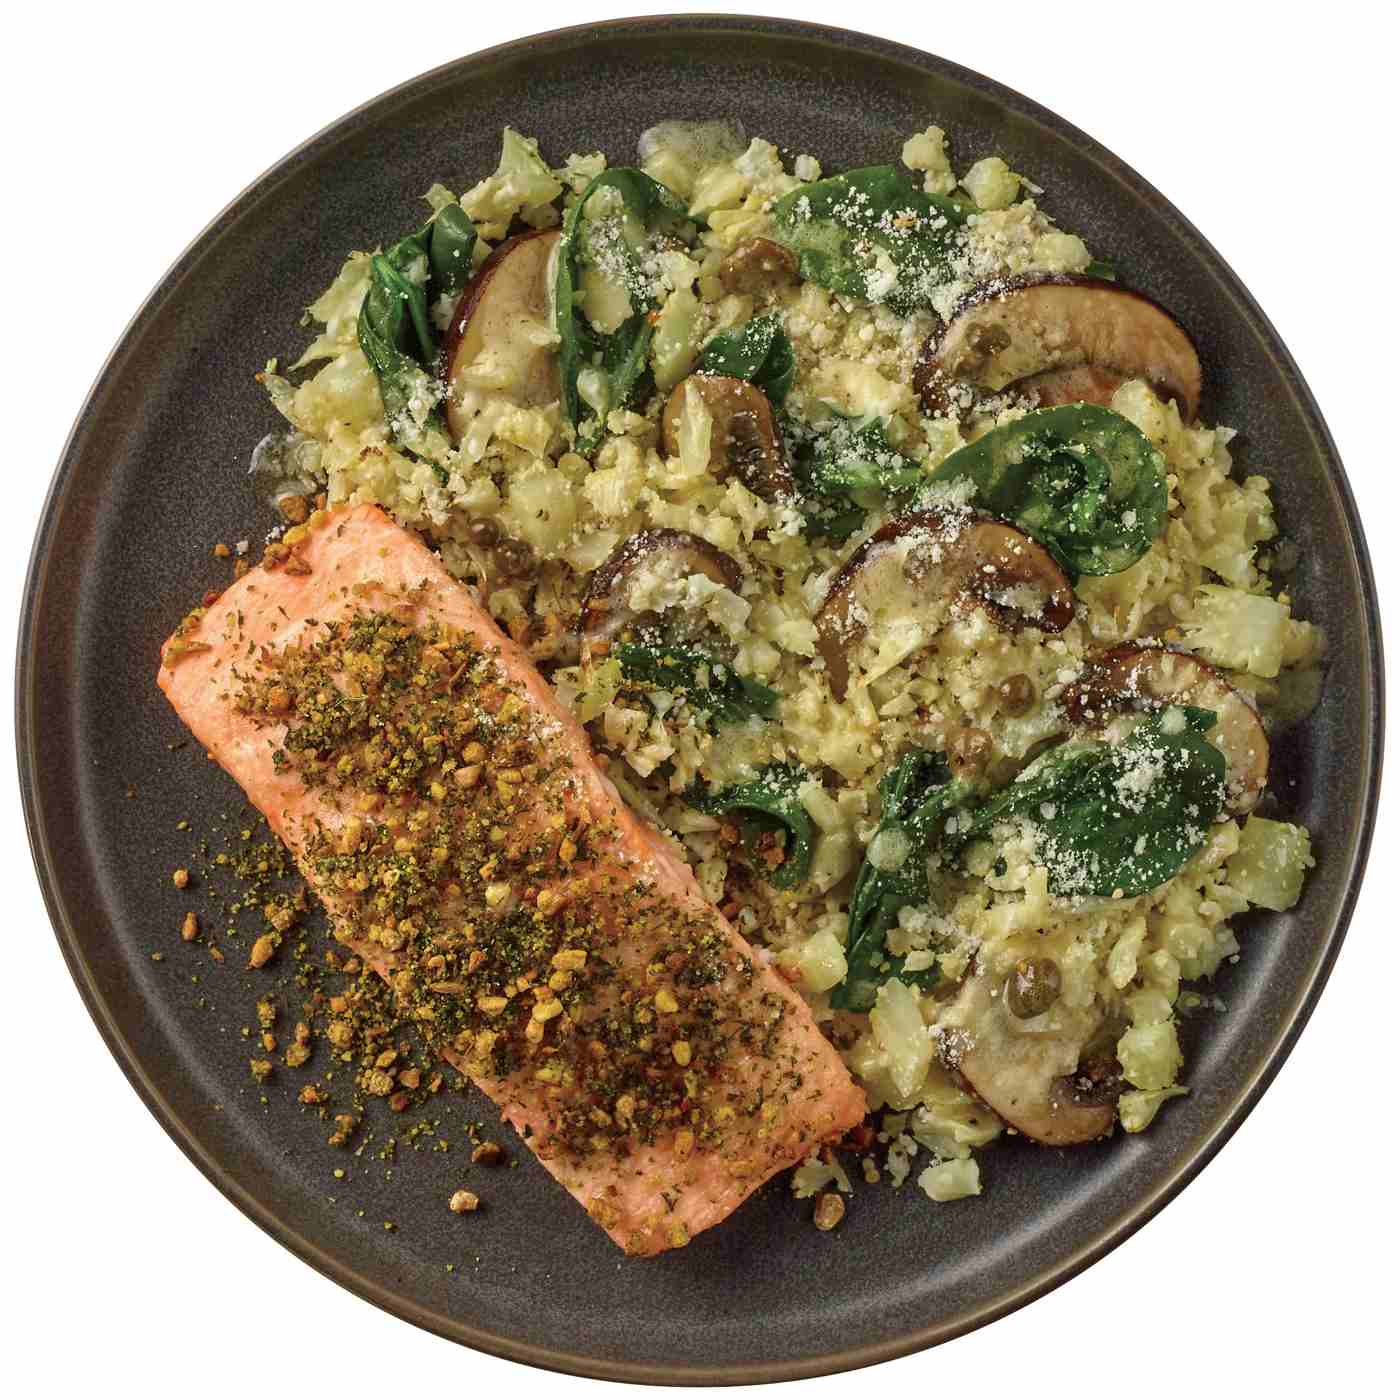 Meal Simple by H-E-B Salmon, Lemon Caper Riced Cauliflower, Mushrooms & Spinach; image 2 of 4